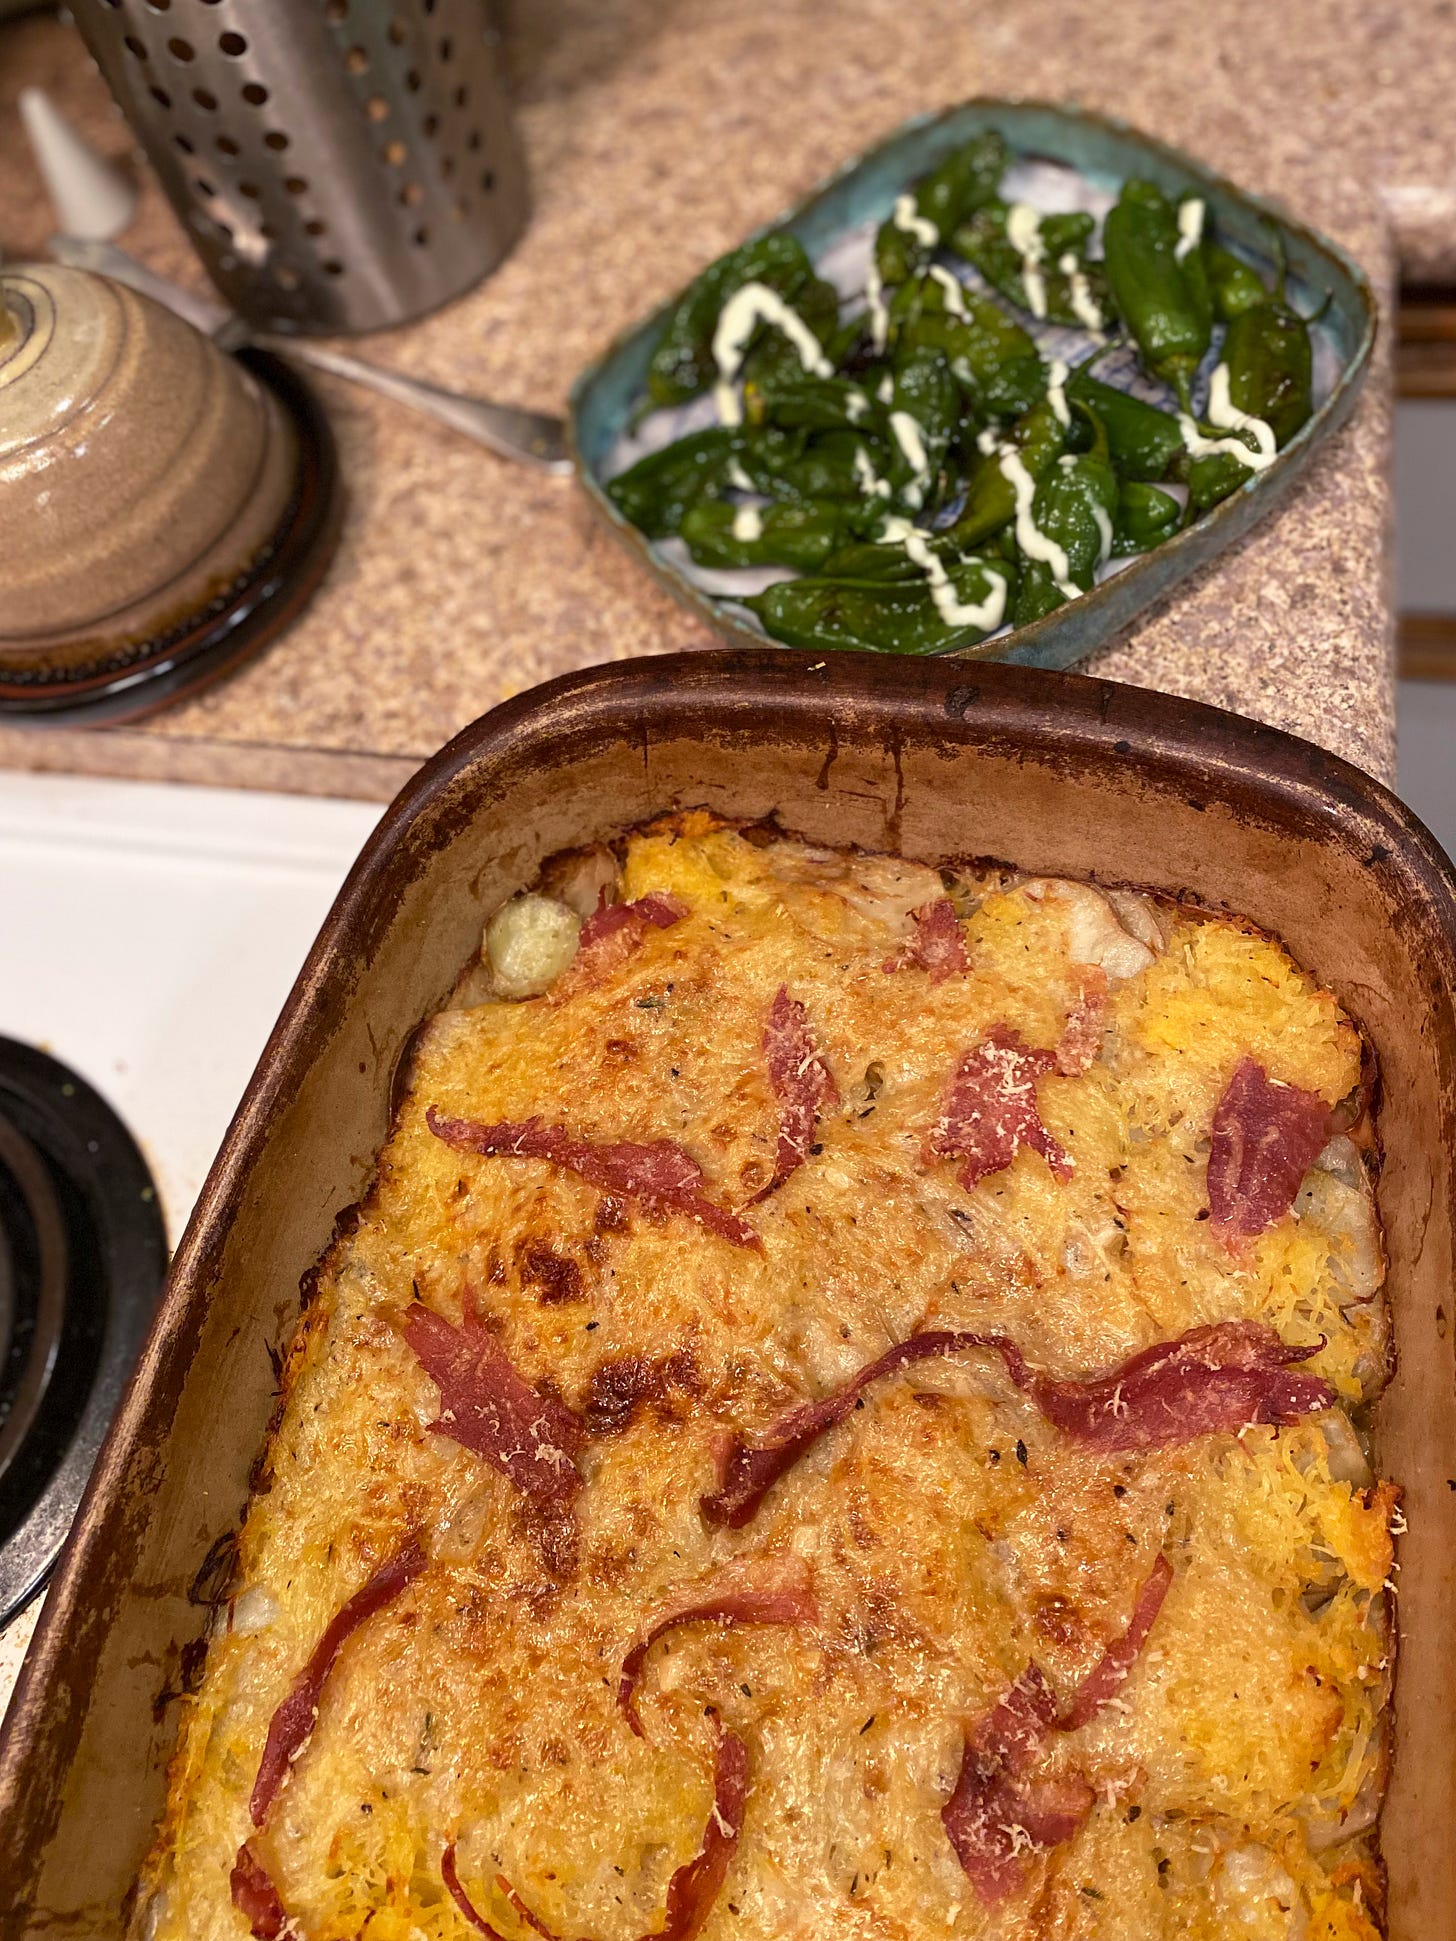 Resting on the stovetop is large rectangular stoneware dish of potato and spaghetti squash gratin, browned on top and crisp at the edges, with torn pieces of prosciutto peeking out from under the cheese. Behind it on the counter is a blue ceramic dish of blistered shishito peppers, with a drizzle of mayo overtop of them.